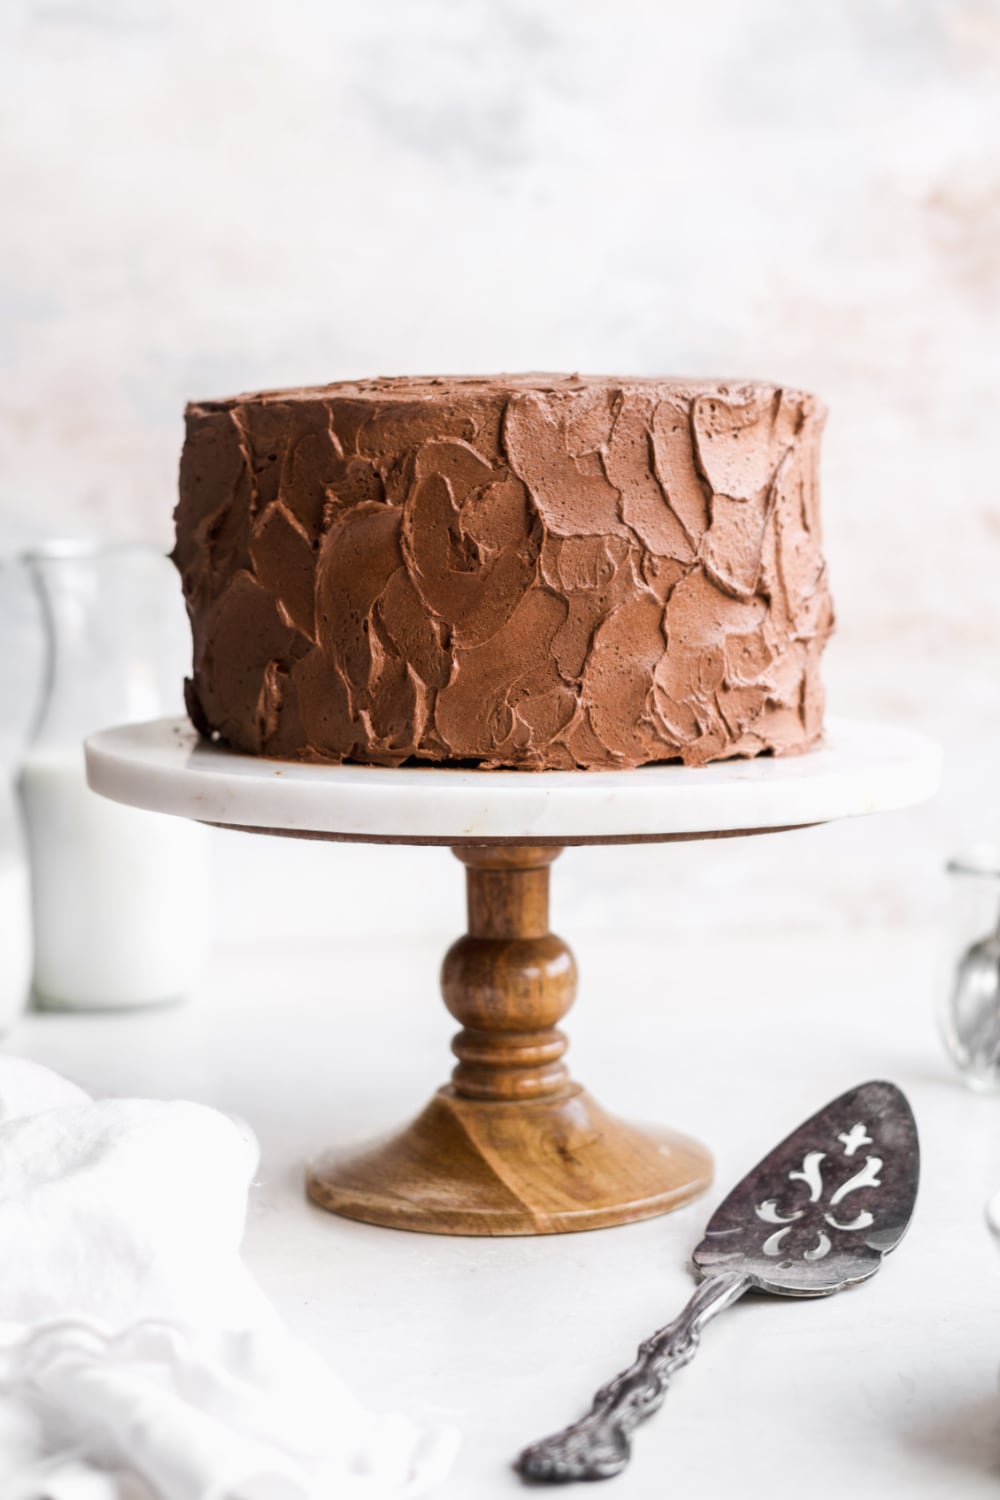 The paleo chocolate cake with frosting on a cake stand.